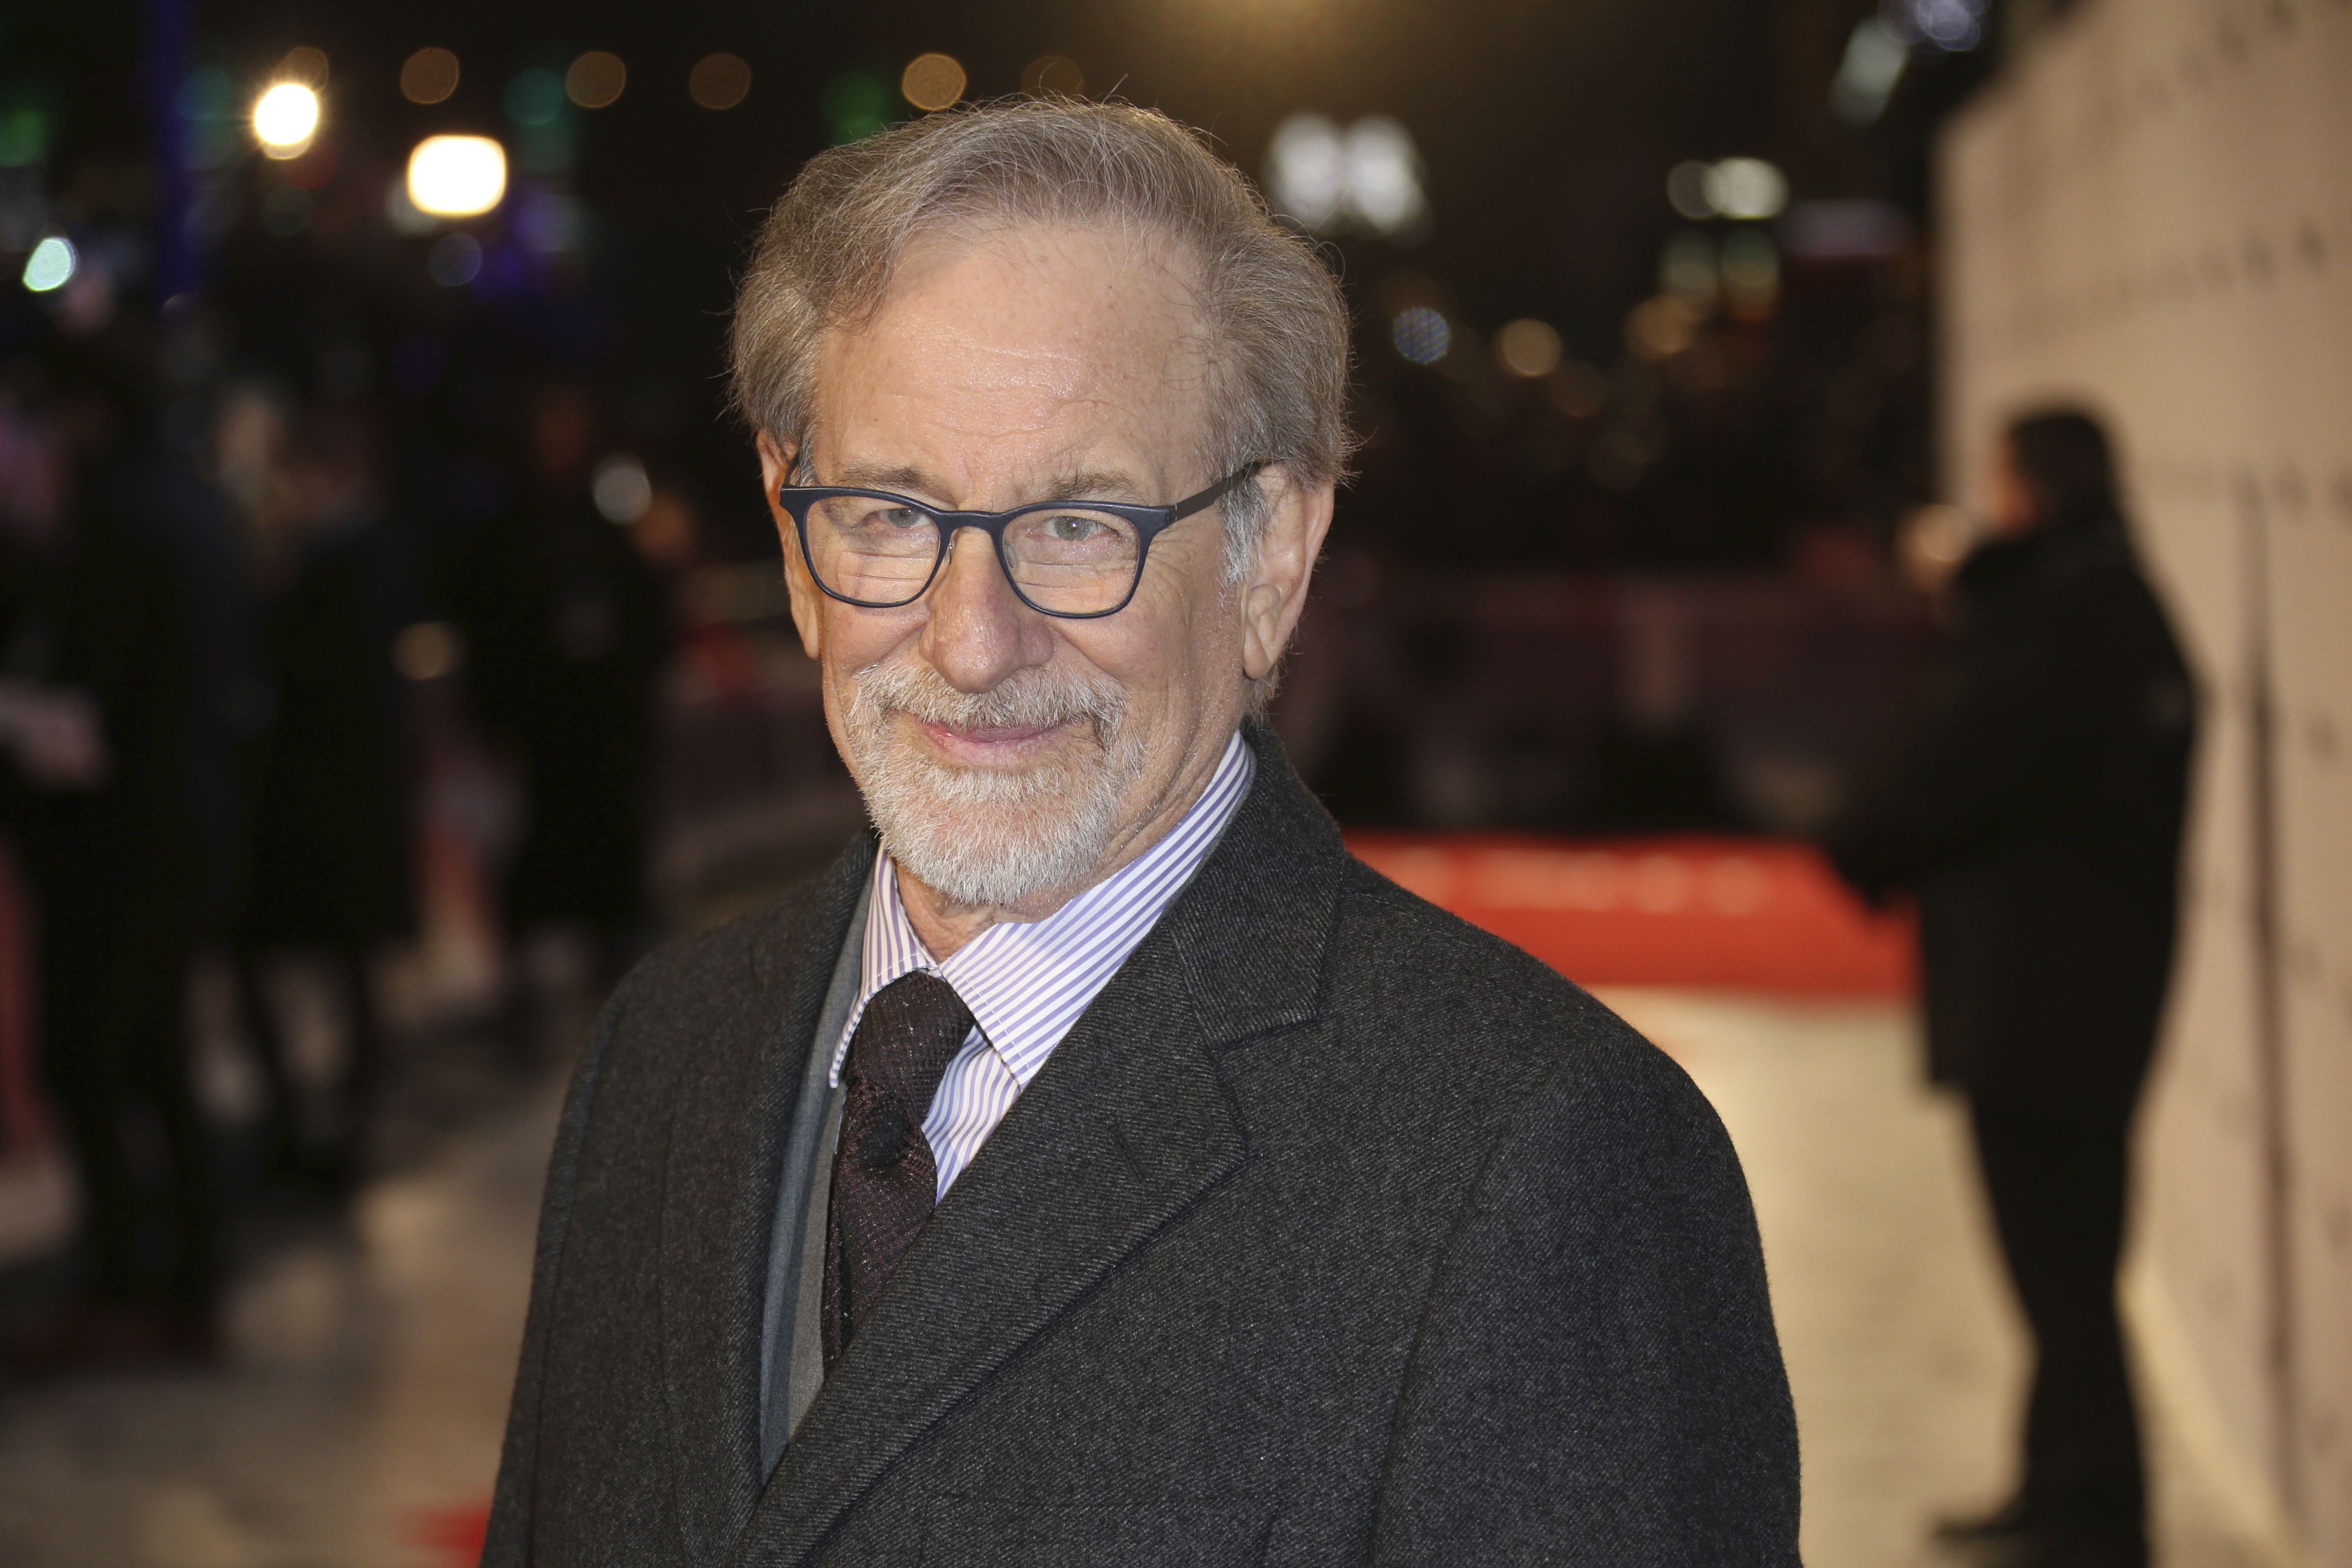 Spielberg to debut ‘The Fabelmans’ at Toronto Film Festival